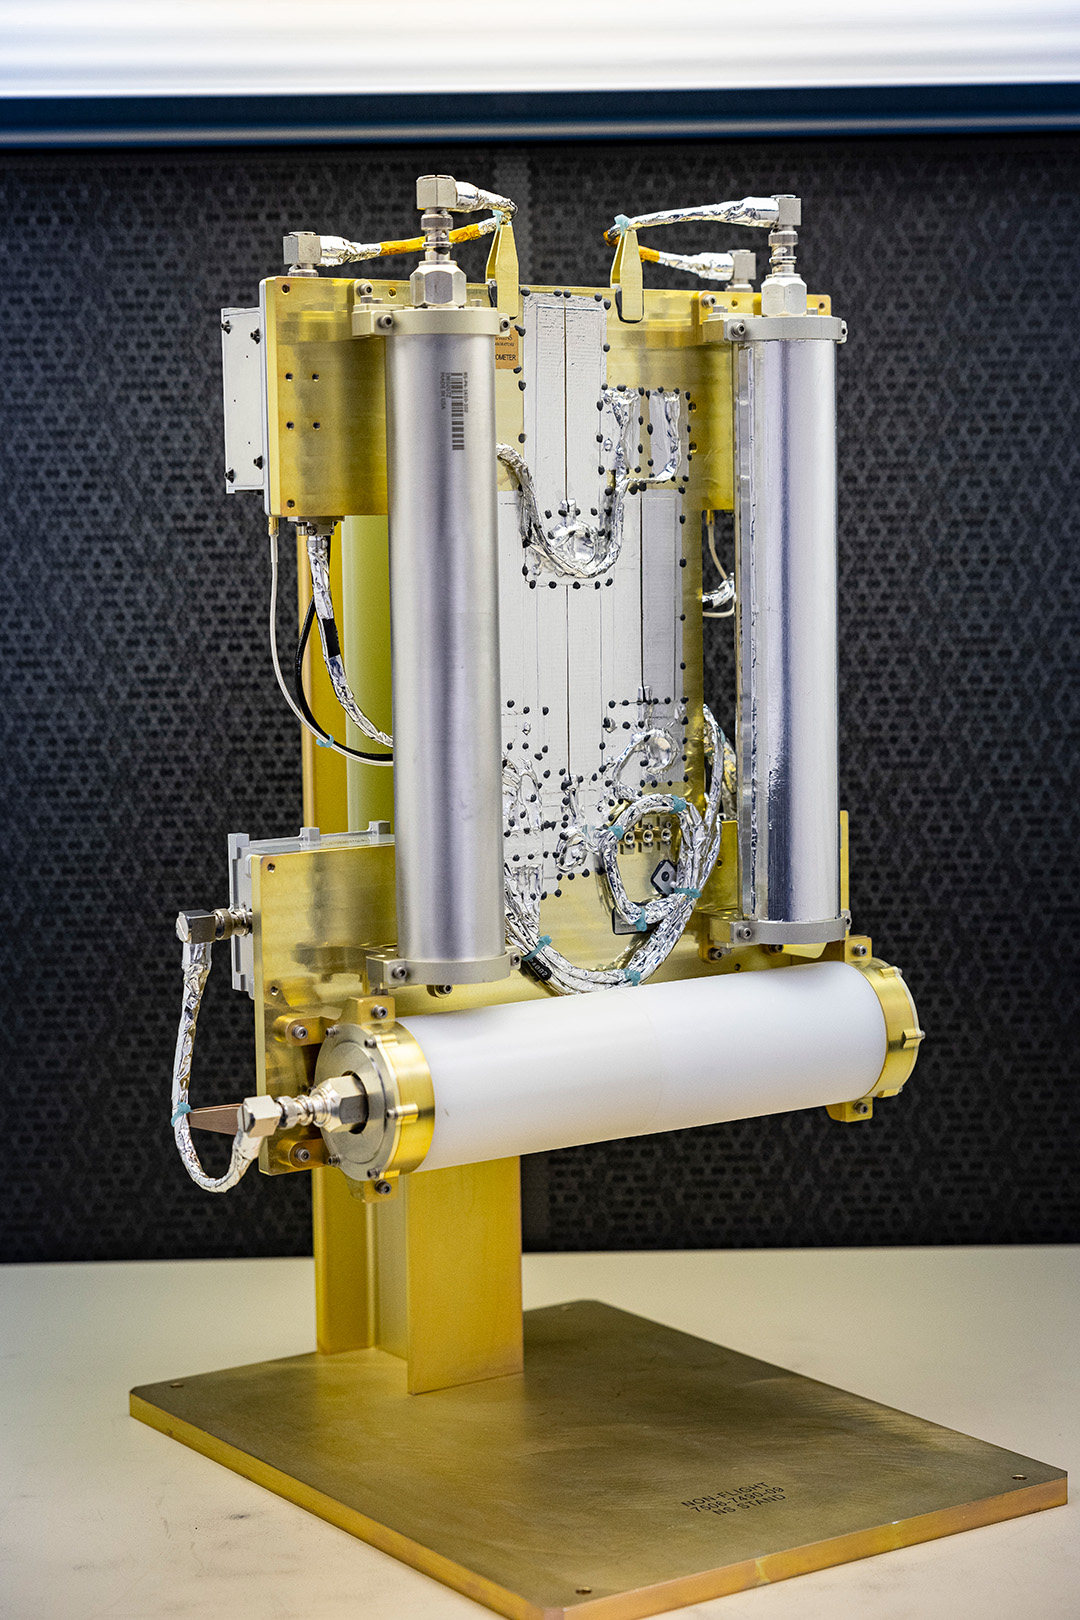 An image of three tubes mounted on a gold platform, the neutron spectrometer